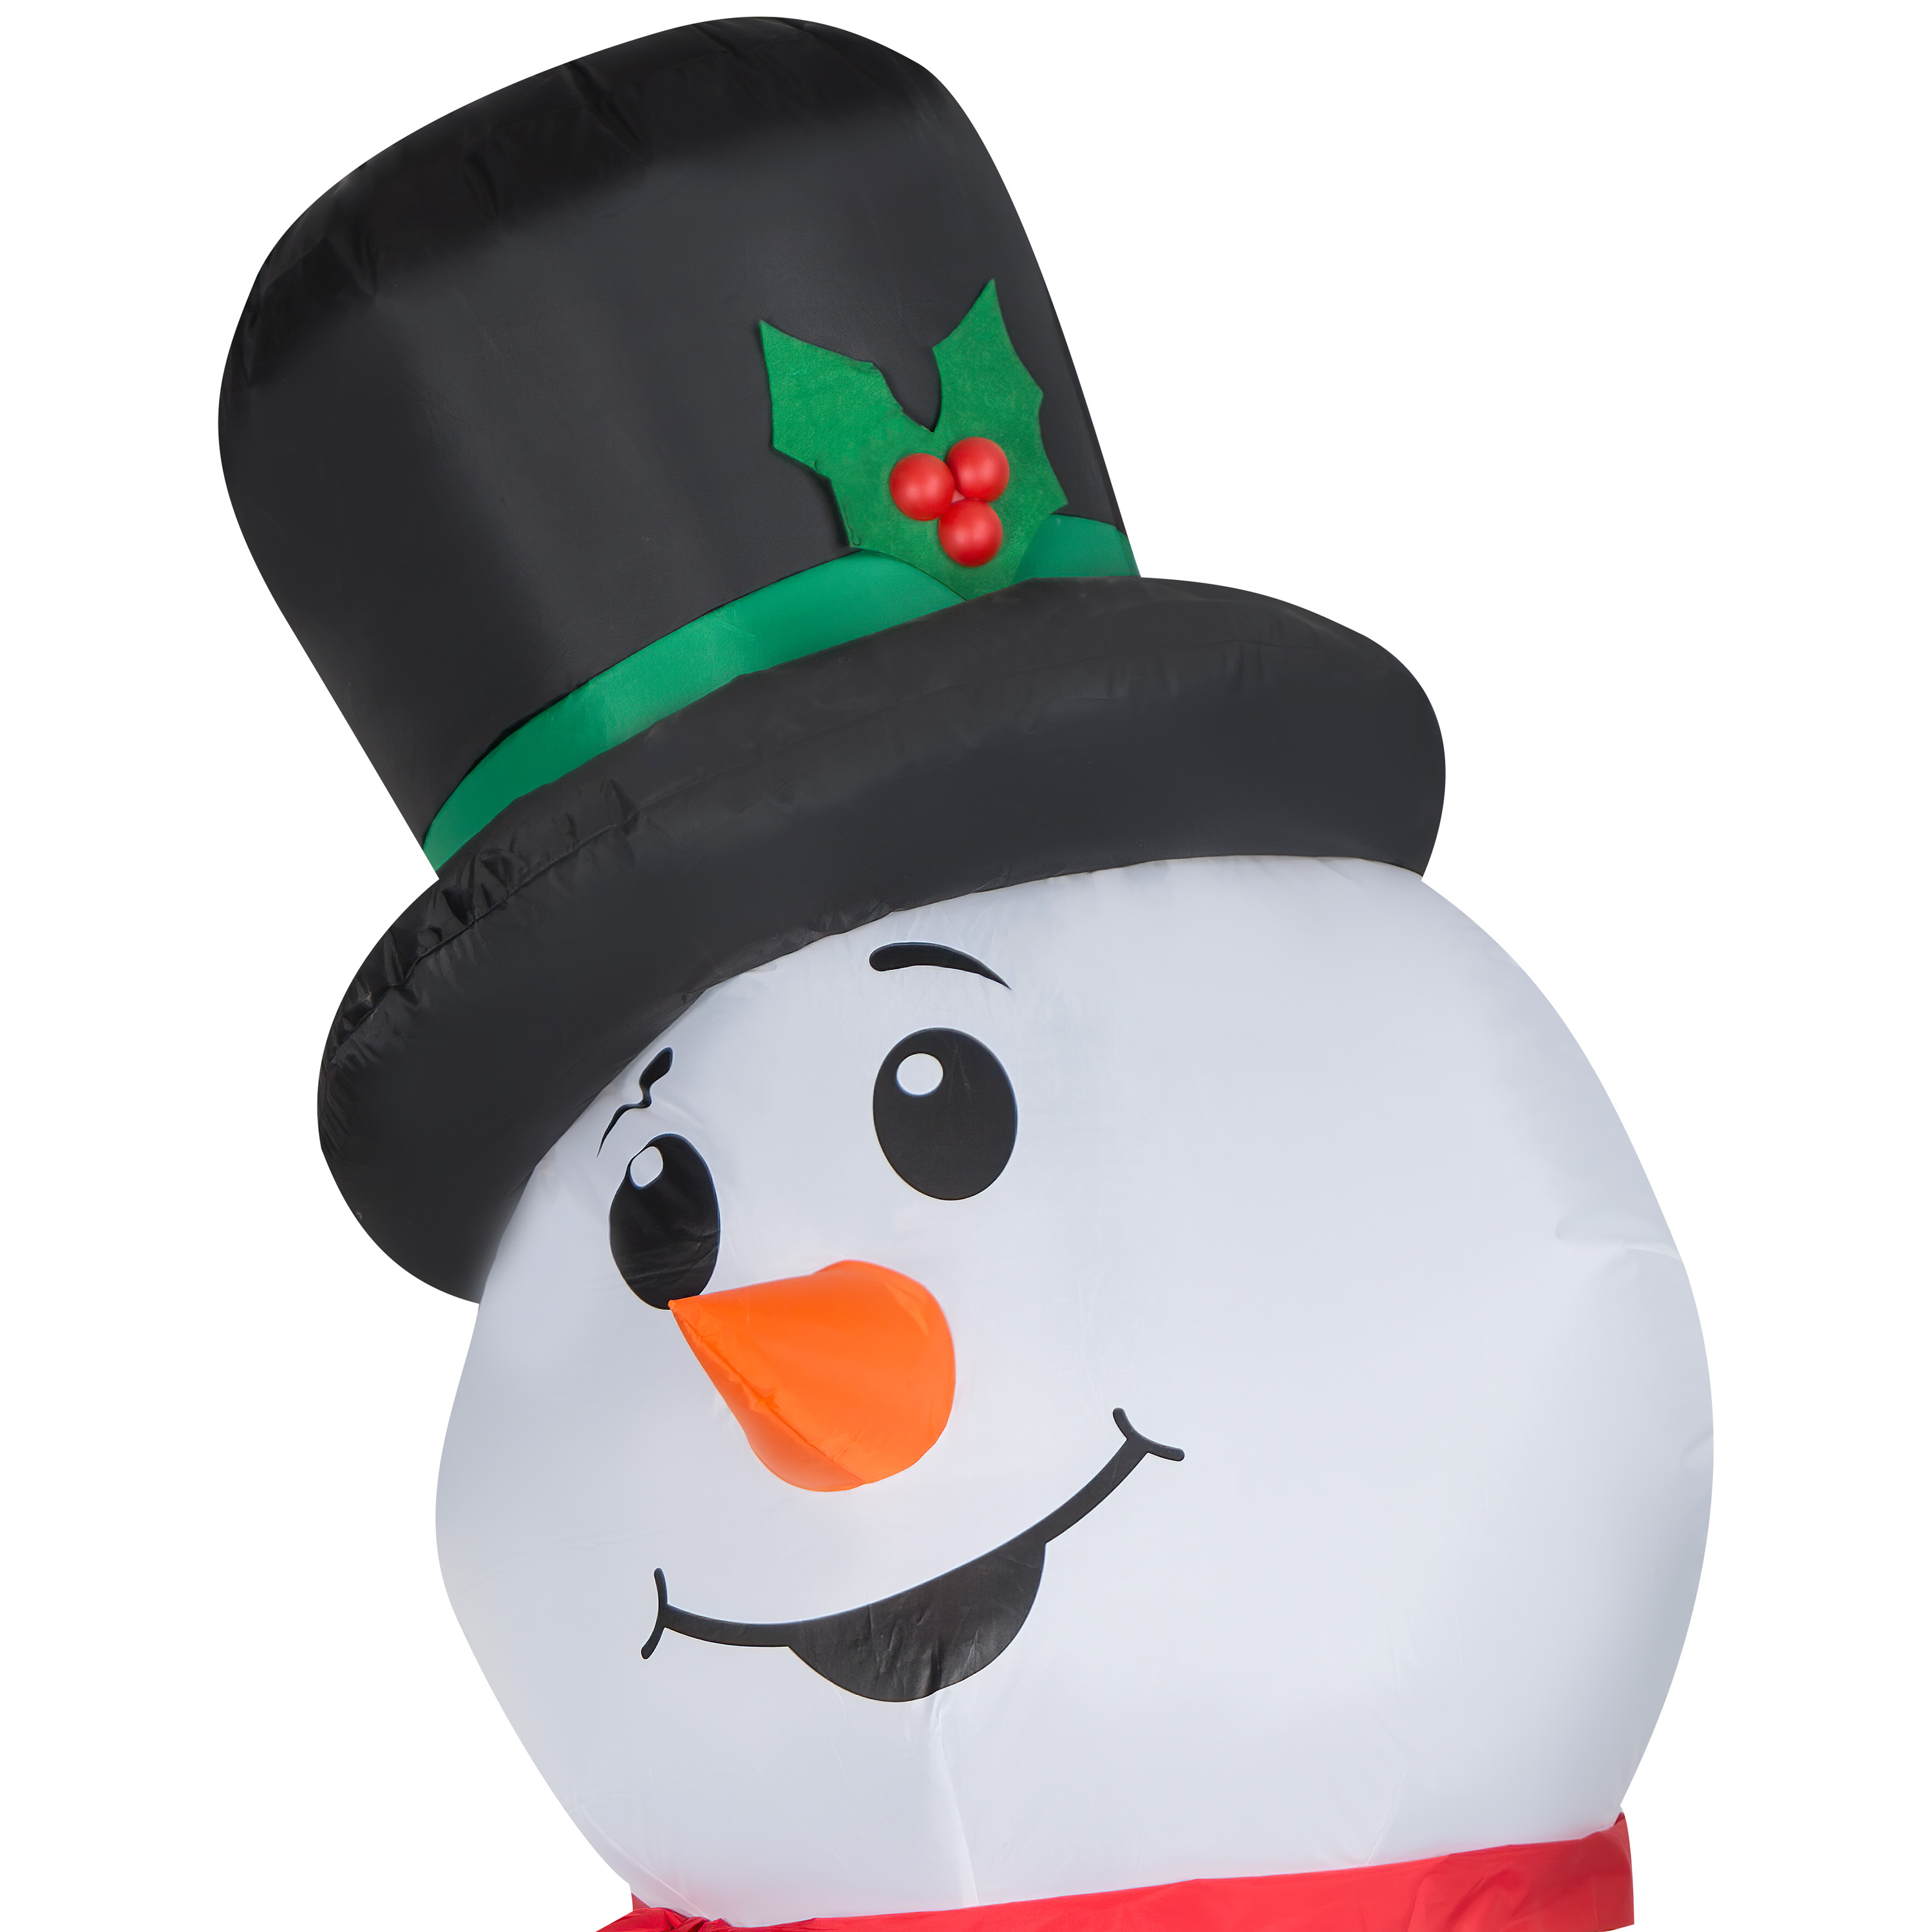 Airblown Inflatables Large Snowman, 9 Feet Tall - image 3 of 6